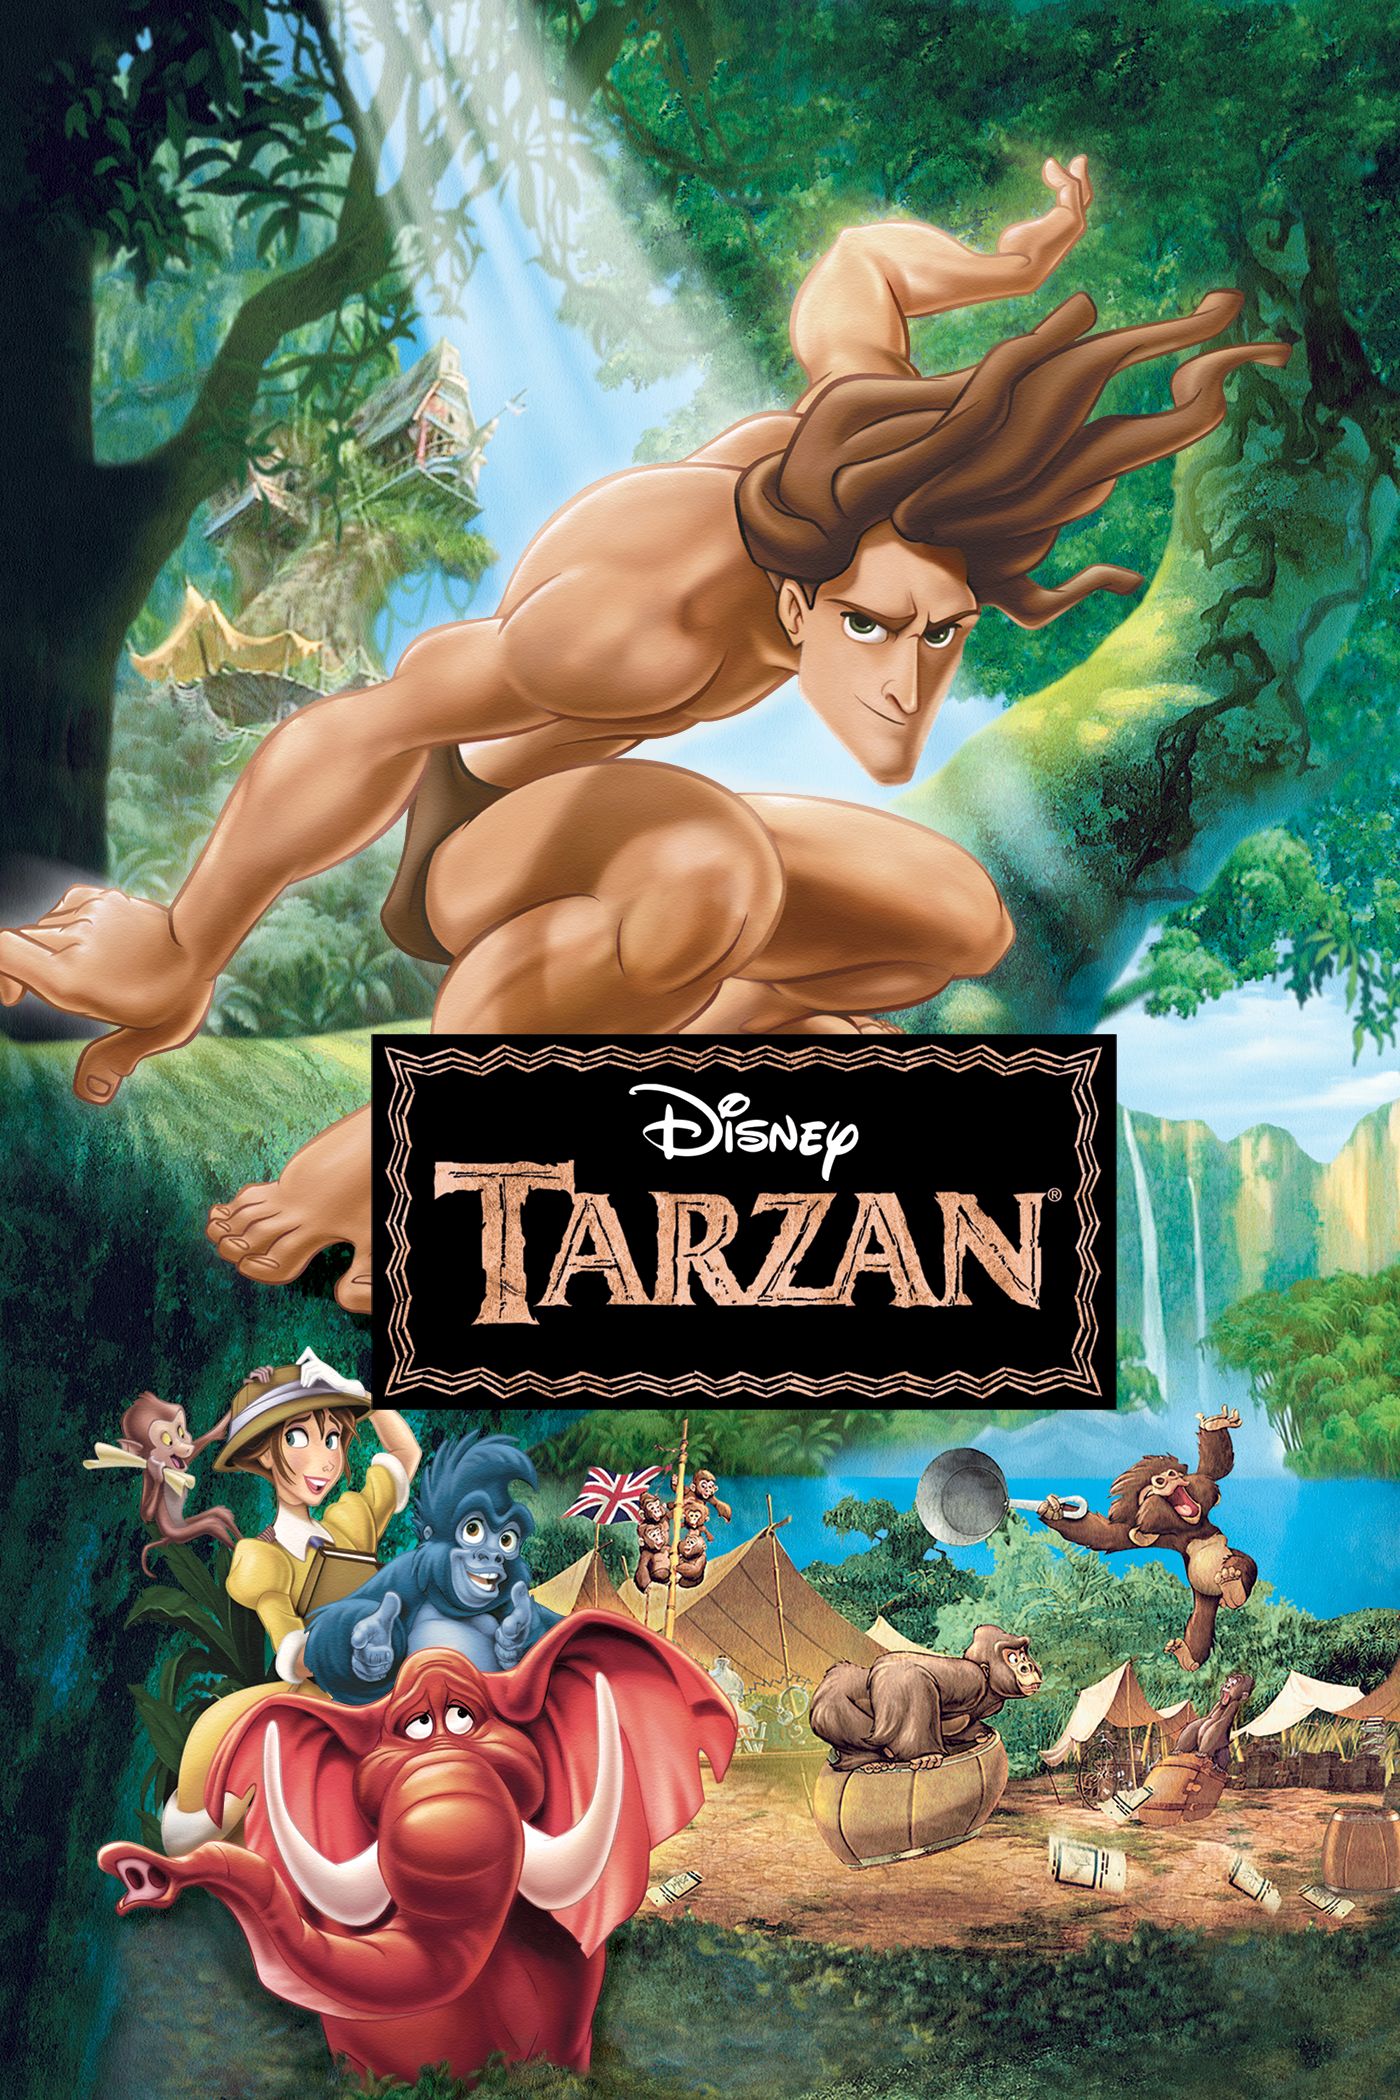 diane chisolm recommends tarzan full movie 1999 pic